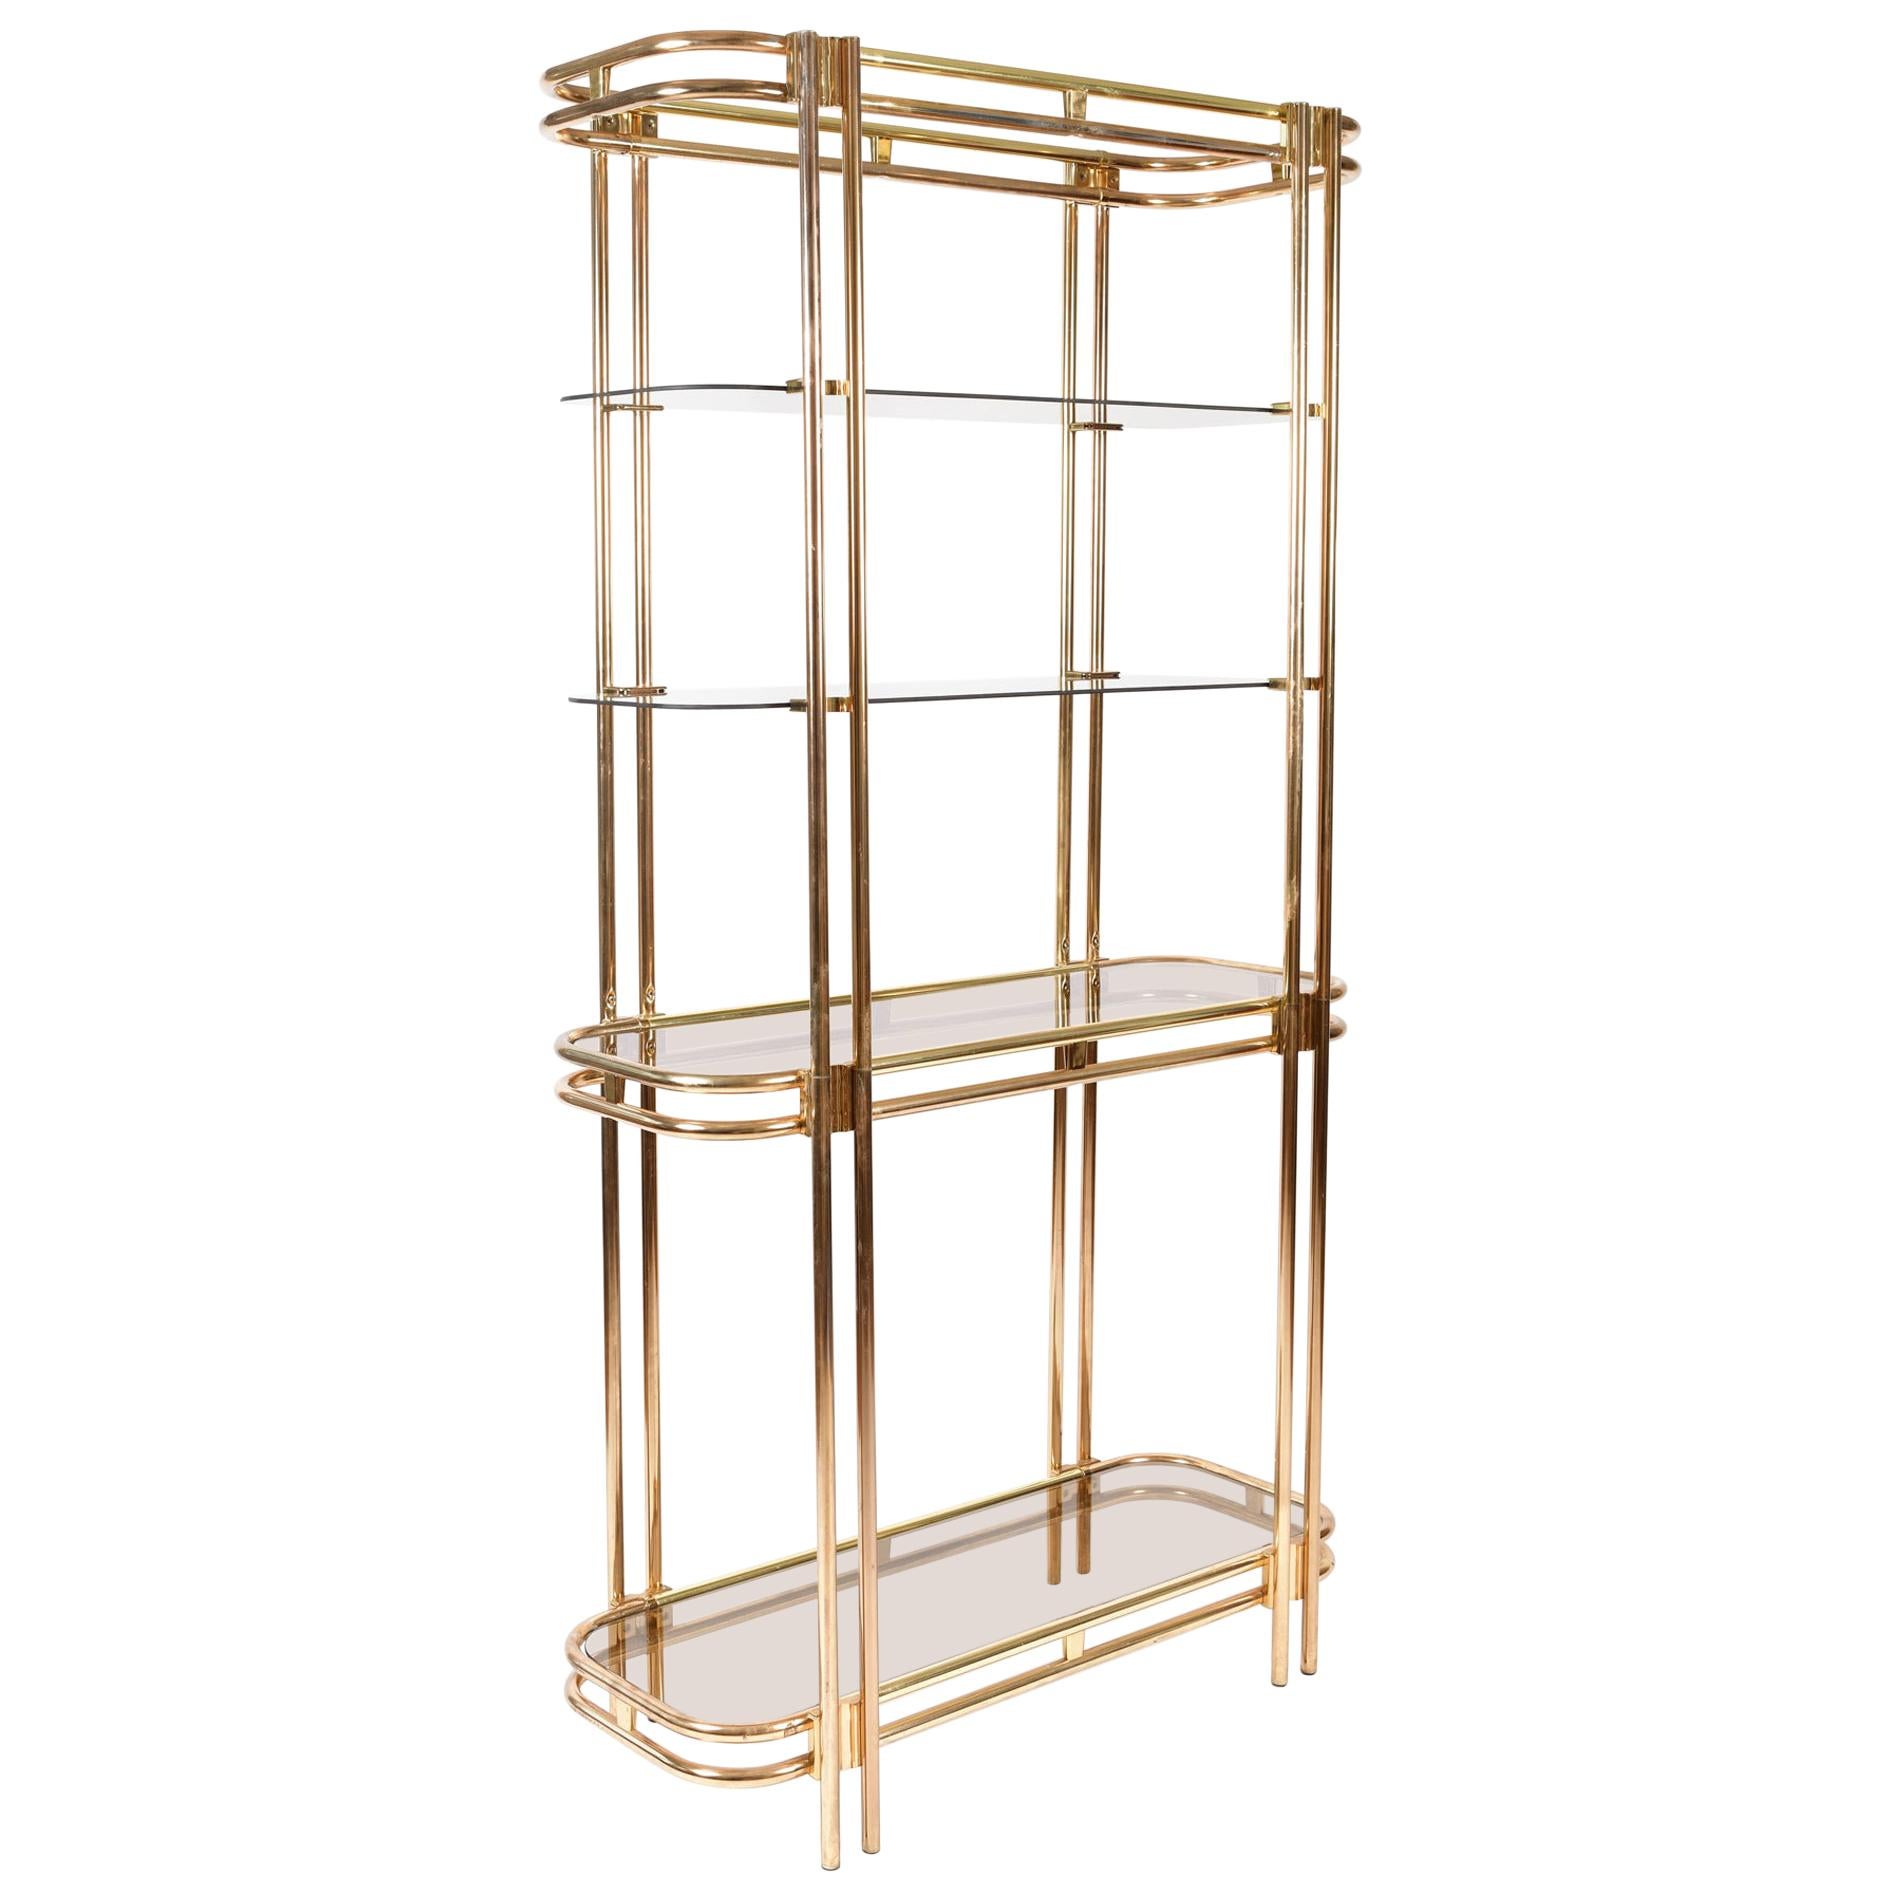 1970s American Hollywood Regency Brass and Glass Shelving Unit